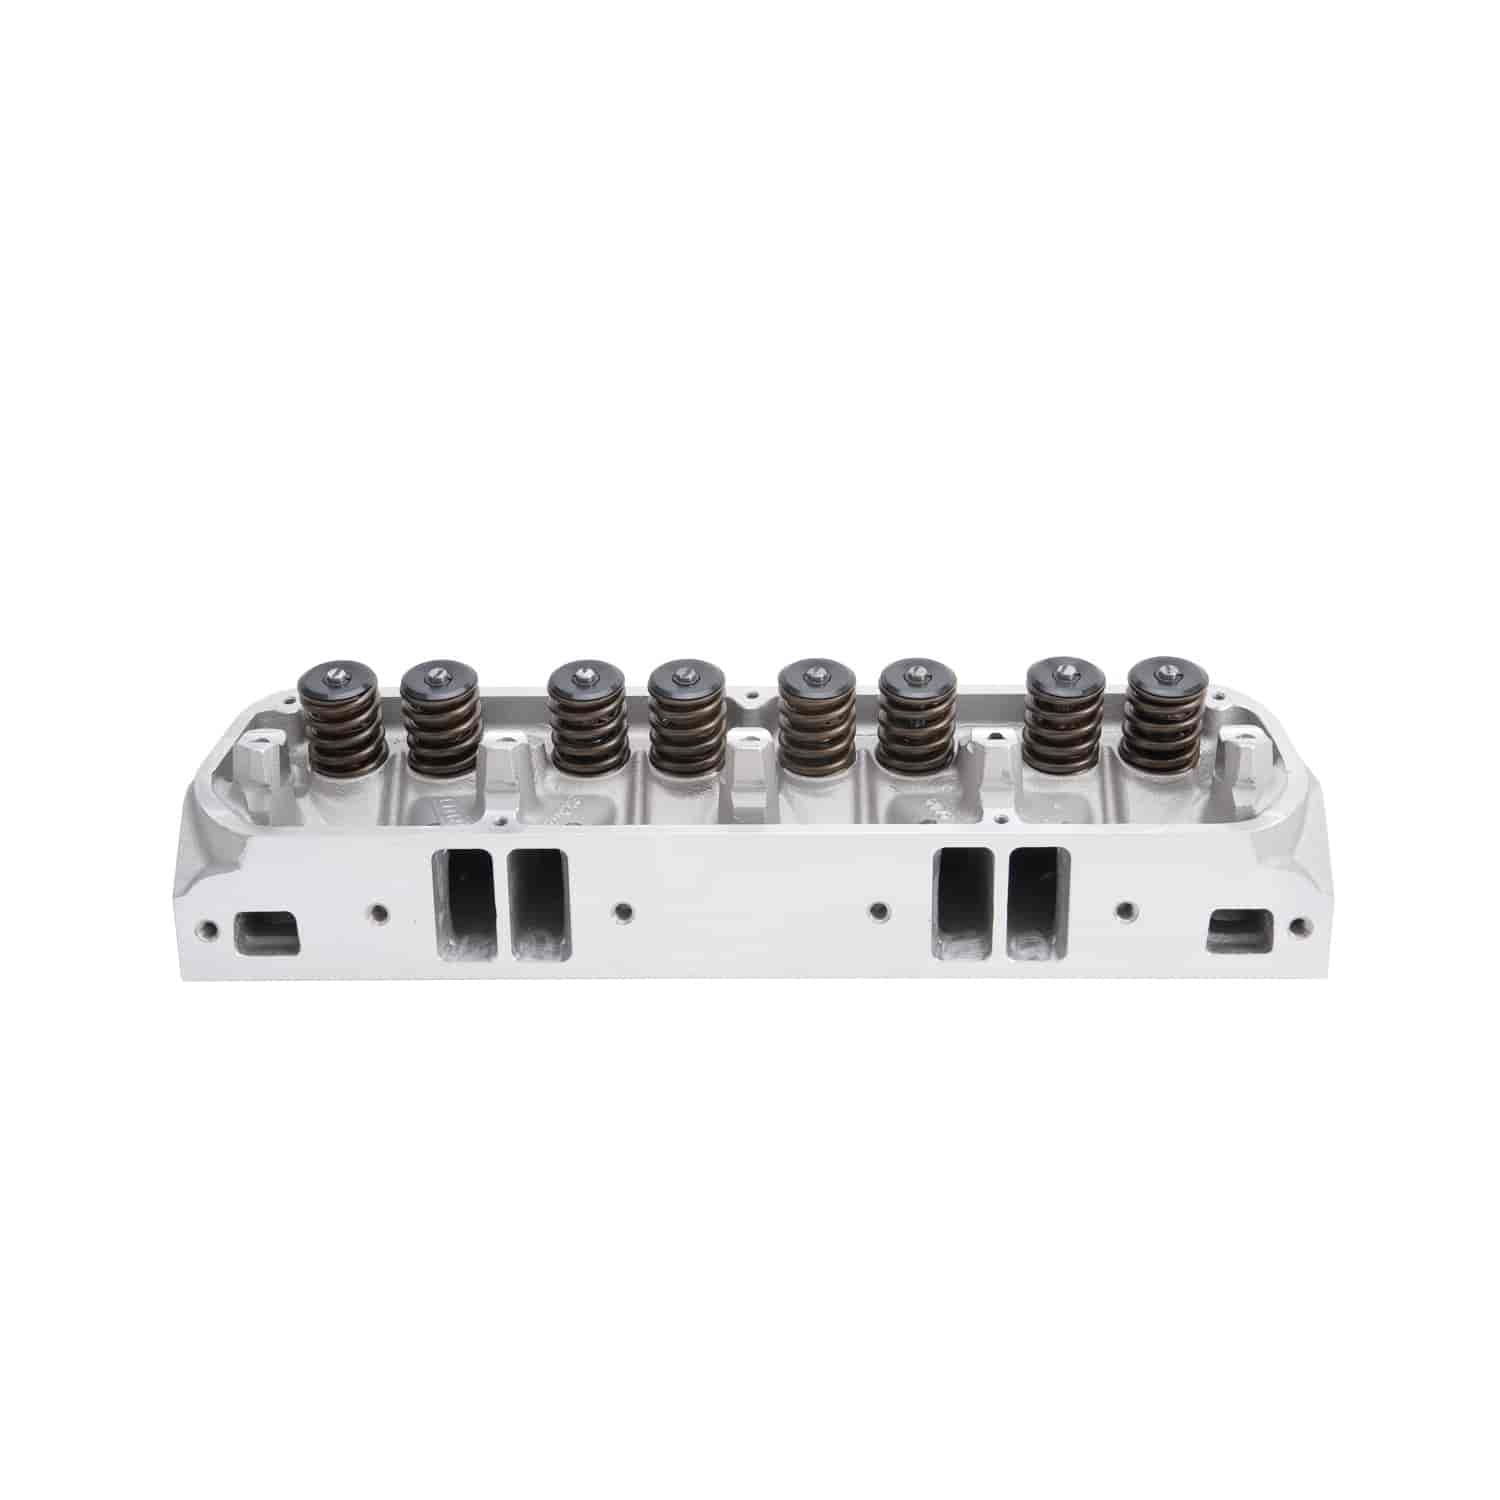 Performer RPM Polished Cylinder Head for Chrysler 340 Small Block